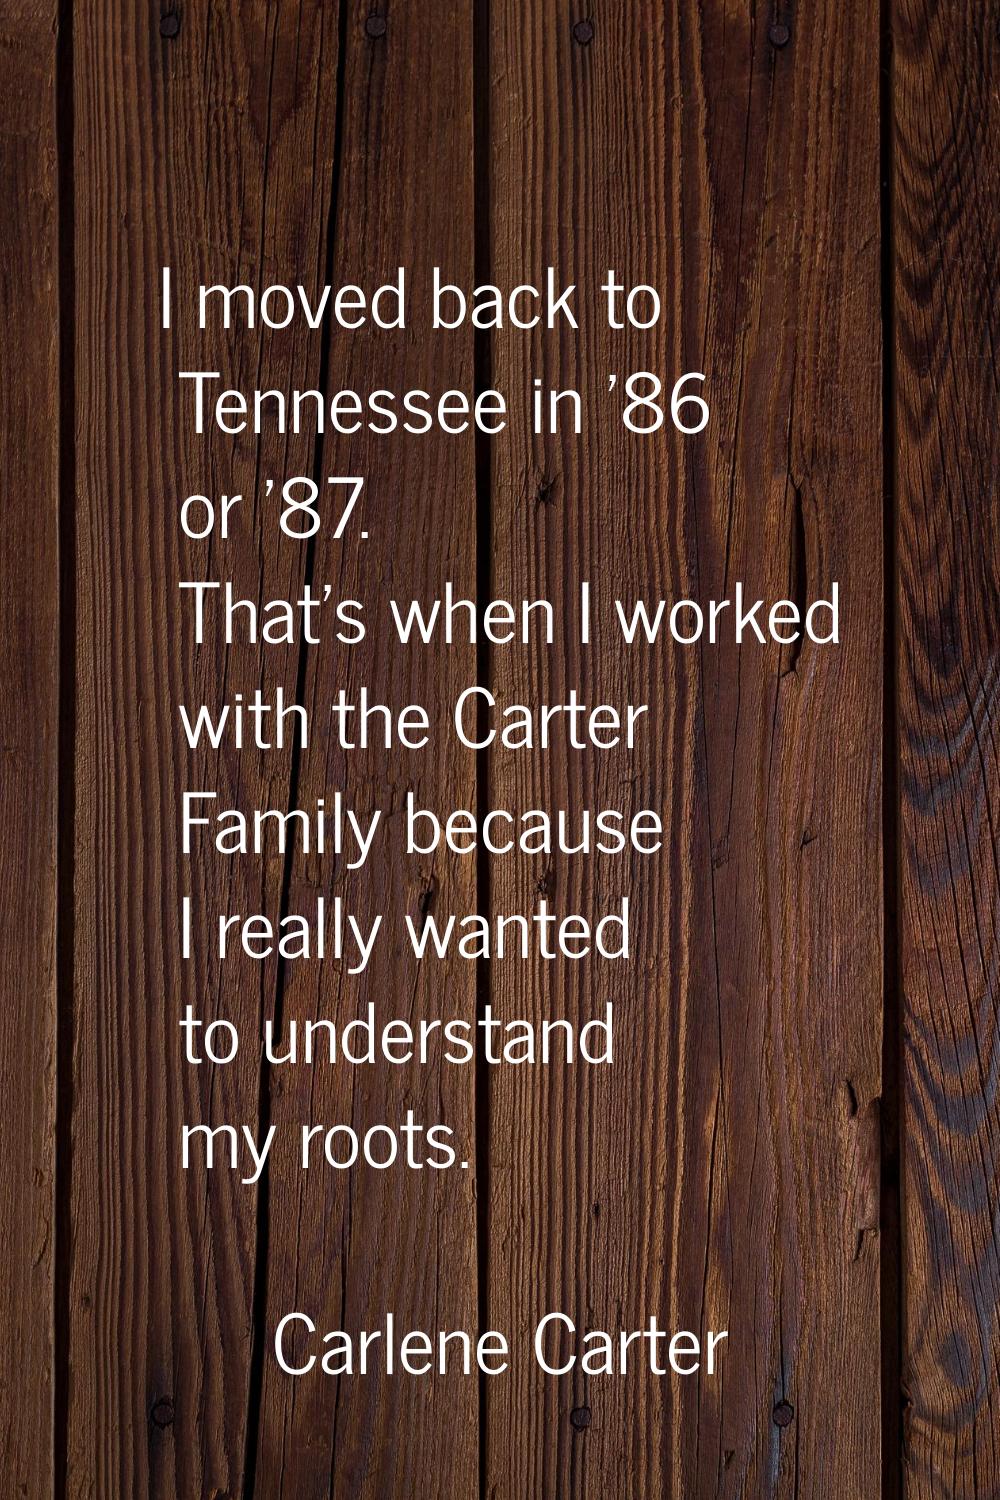 I moved back to Tennessee in '86 or '87. That's when I worked with the Carter Family because I real